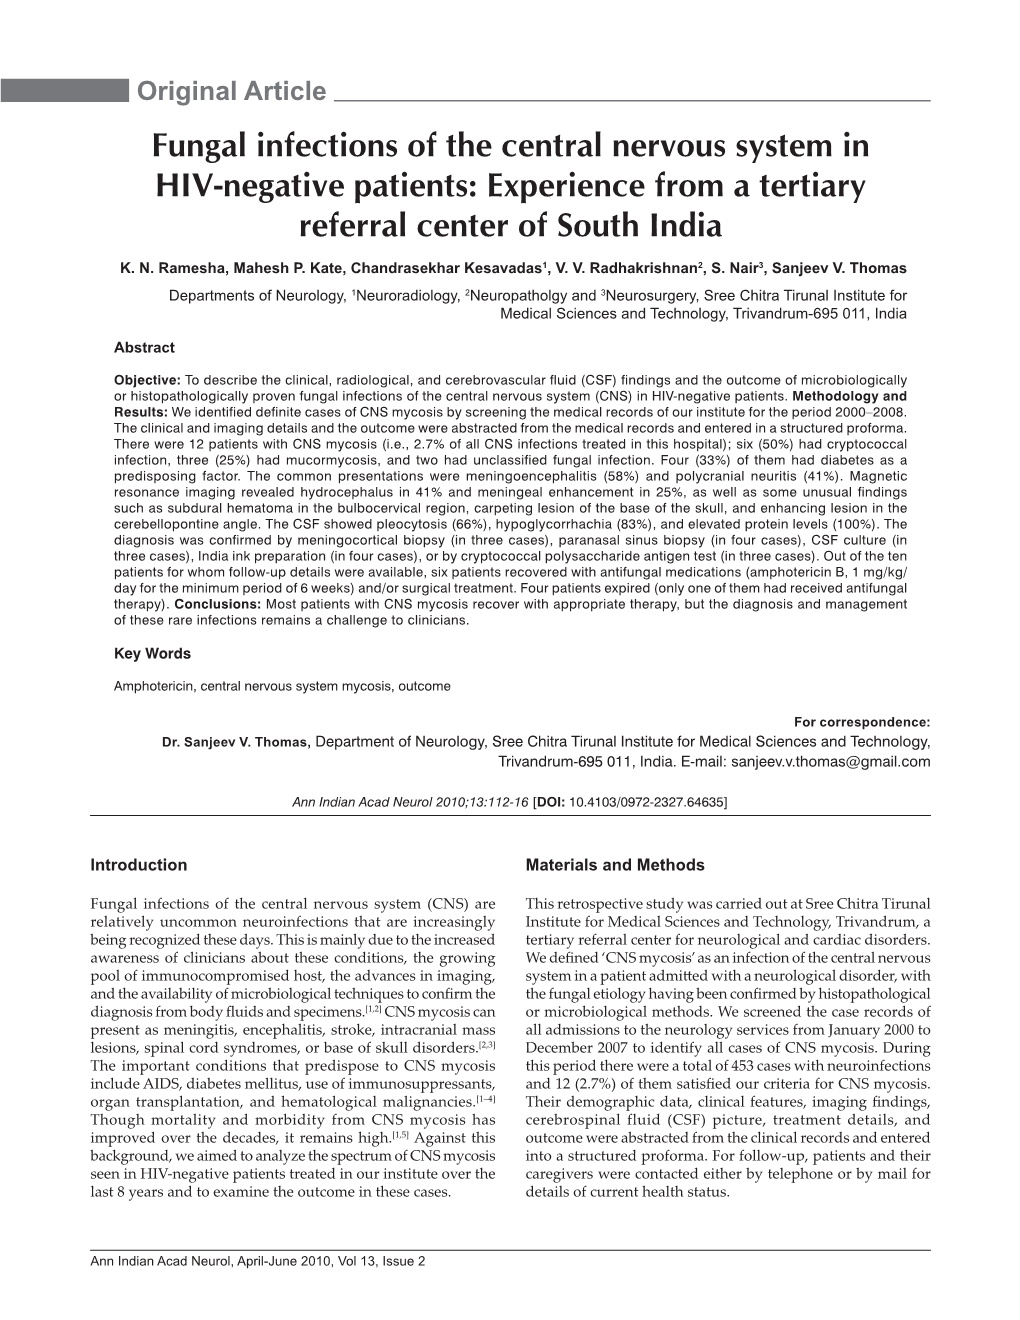 Fungal Infections of the Central Nervous System in HIV-Negative Patients: Experience from a Tertiary Referral Center of South India